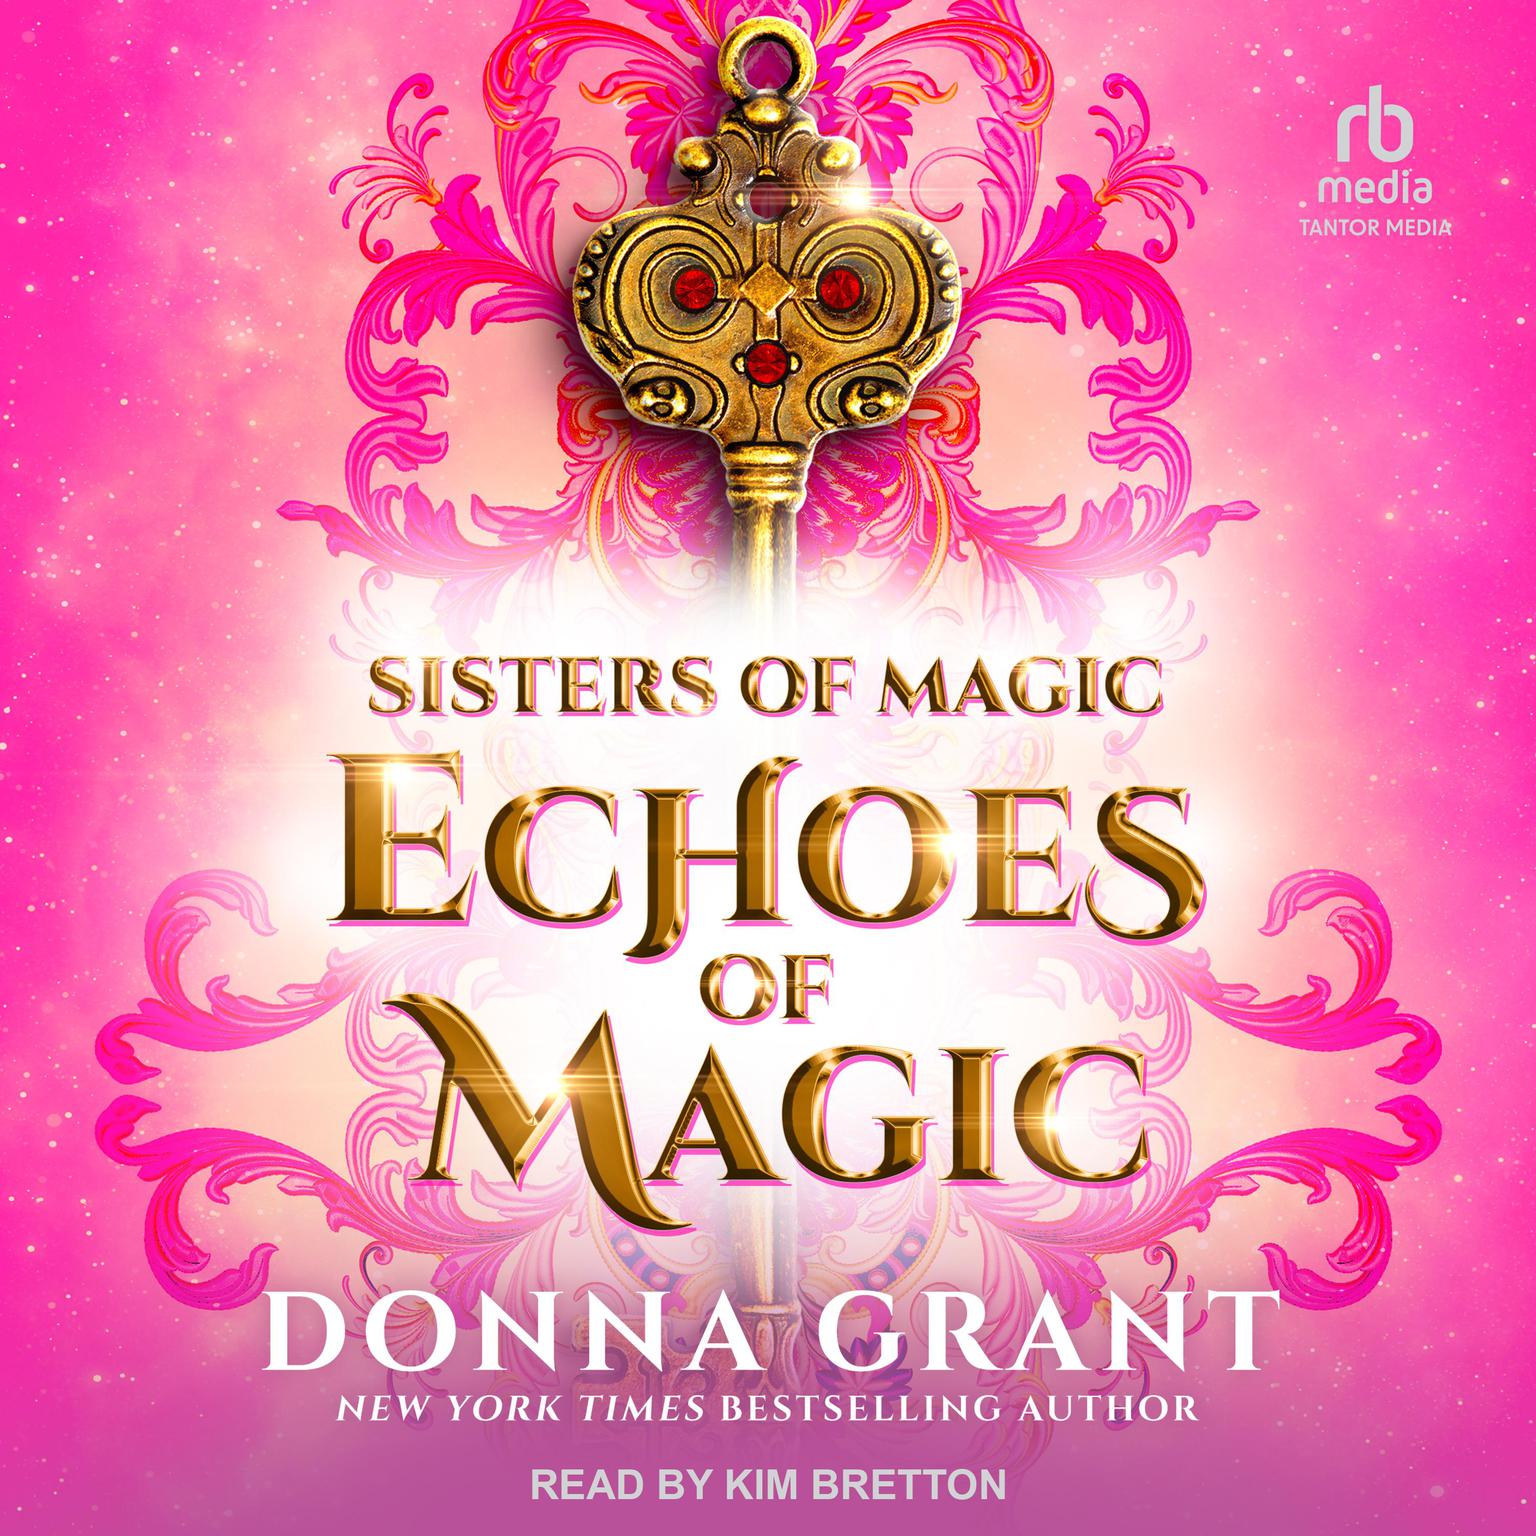 Echoes of Magic Audiobook, by Donna Grant